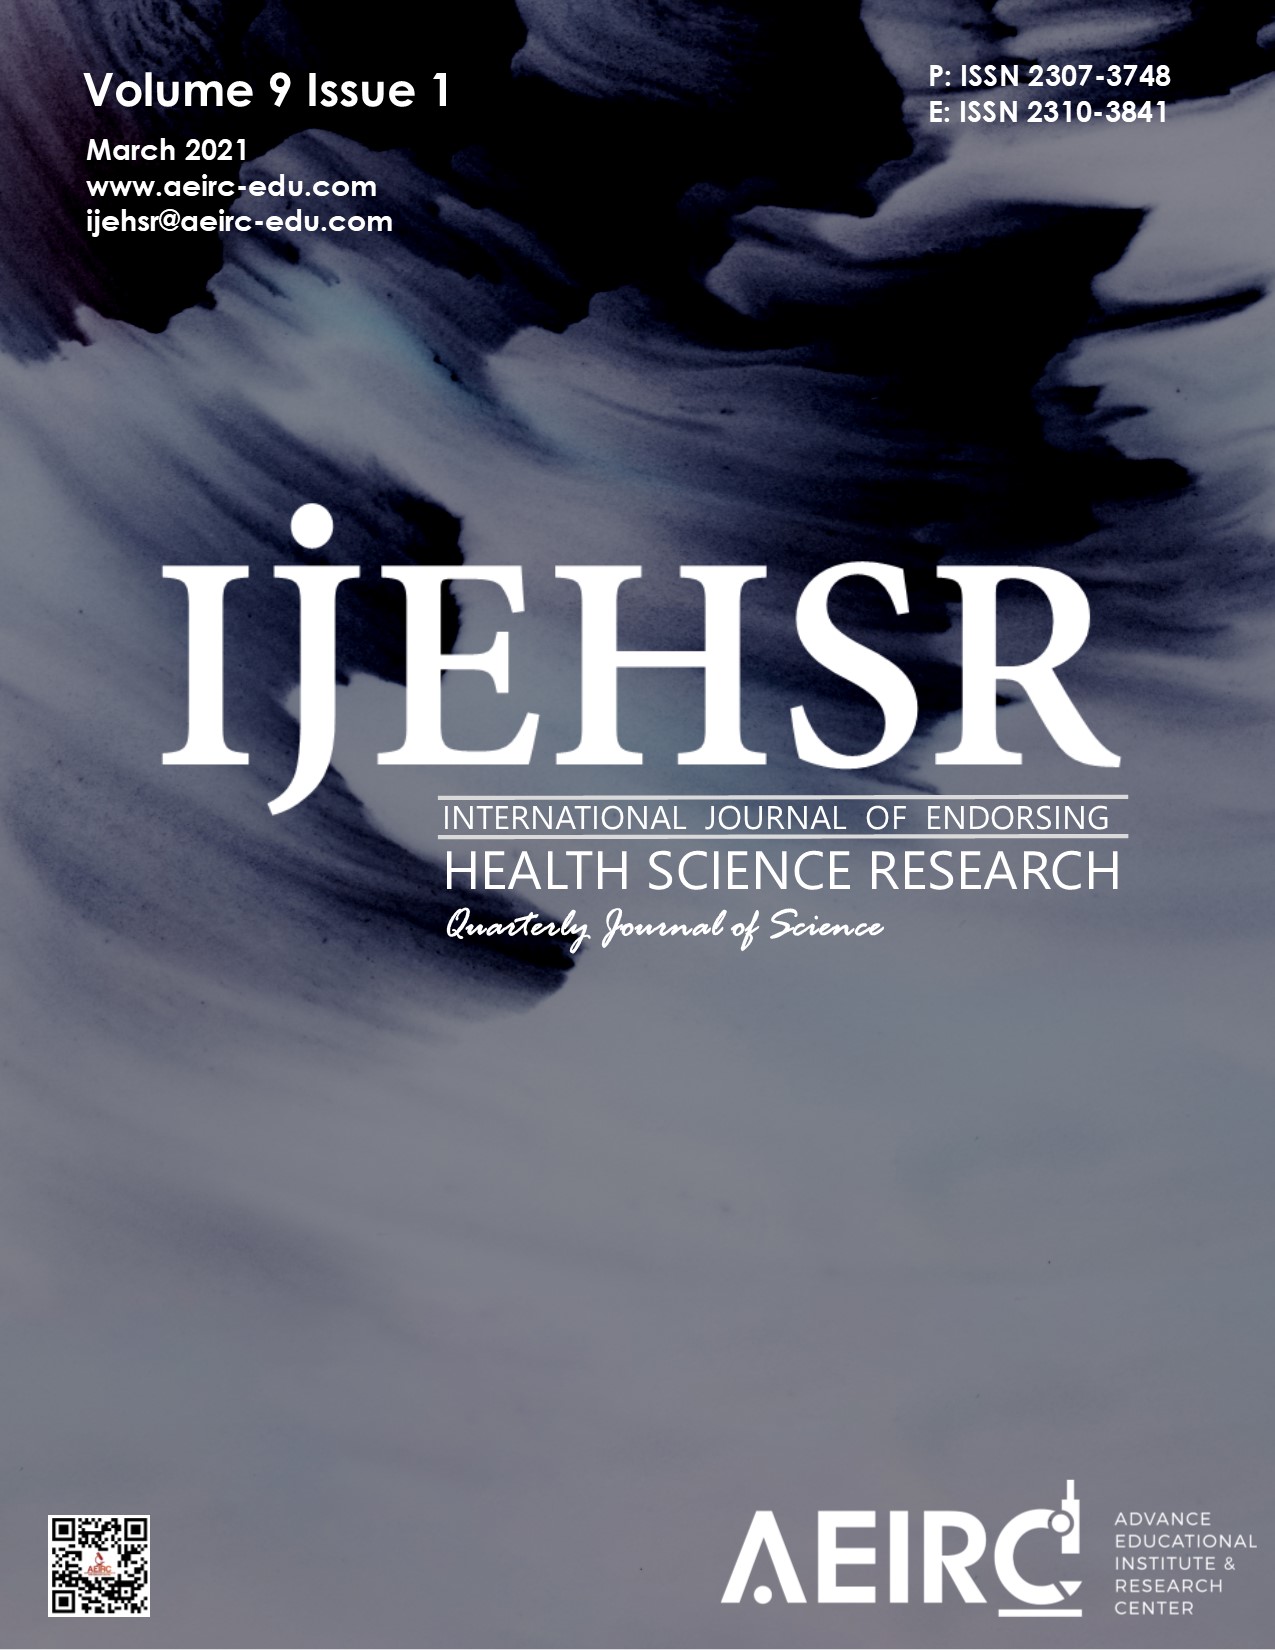 					View Vol. 9 No. 1 (2021): International Journal of Endorsing Health Science Research
				